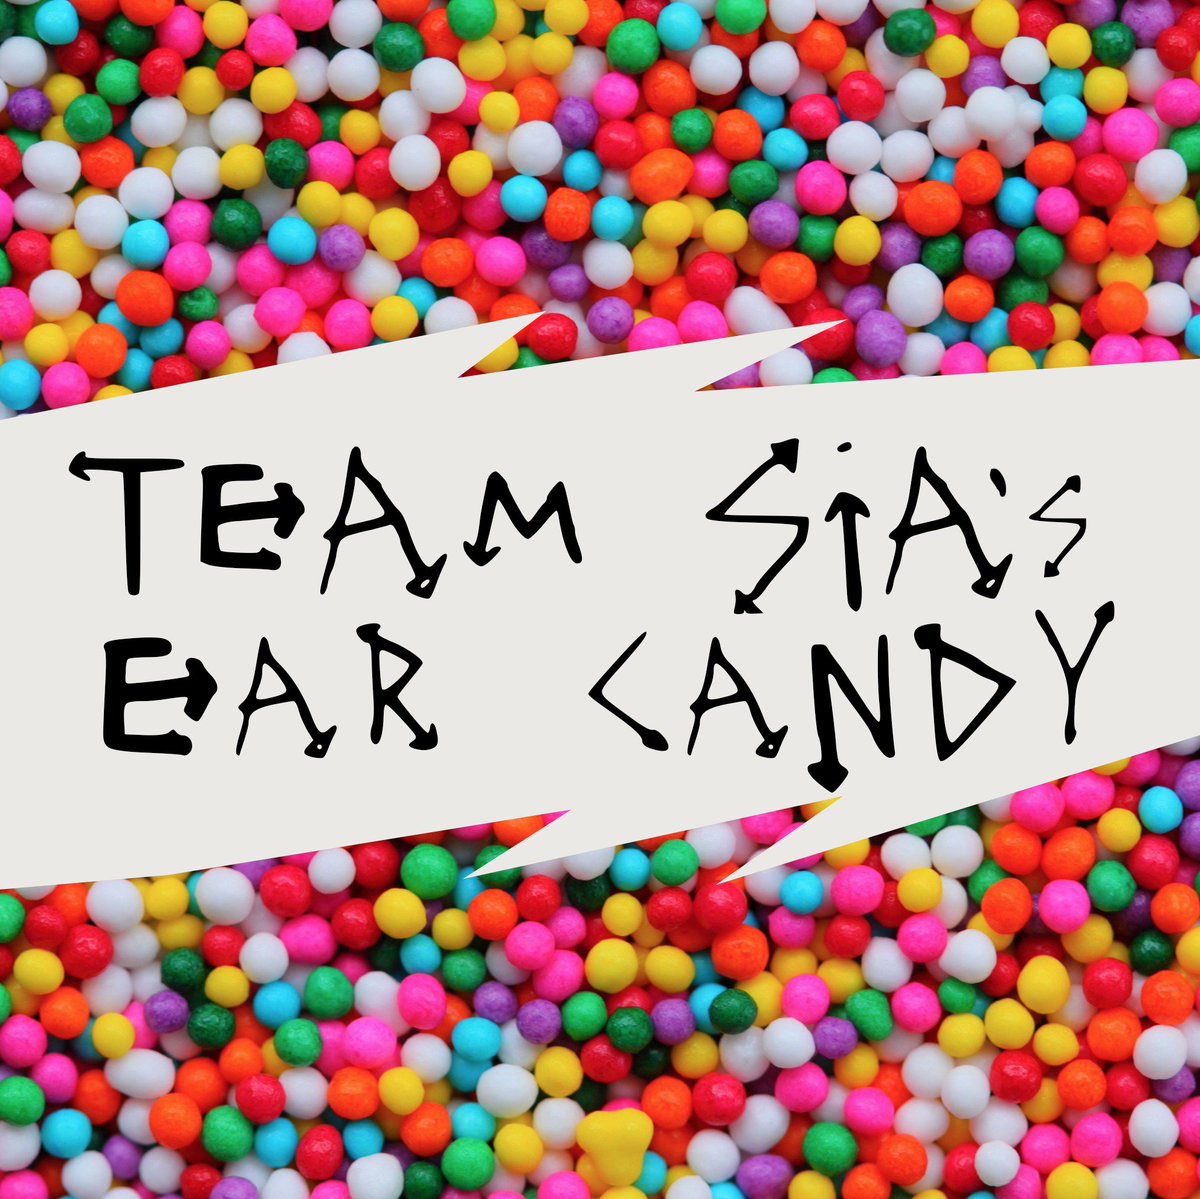 Team Sia has its own playlist on @Spotify. All the music you've been craving #EarCandy ???????? https://t.co/odzw5KwfMk https://t.co/G2BakEHsQe